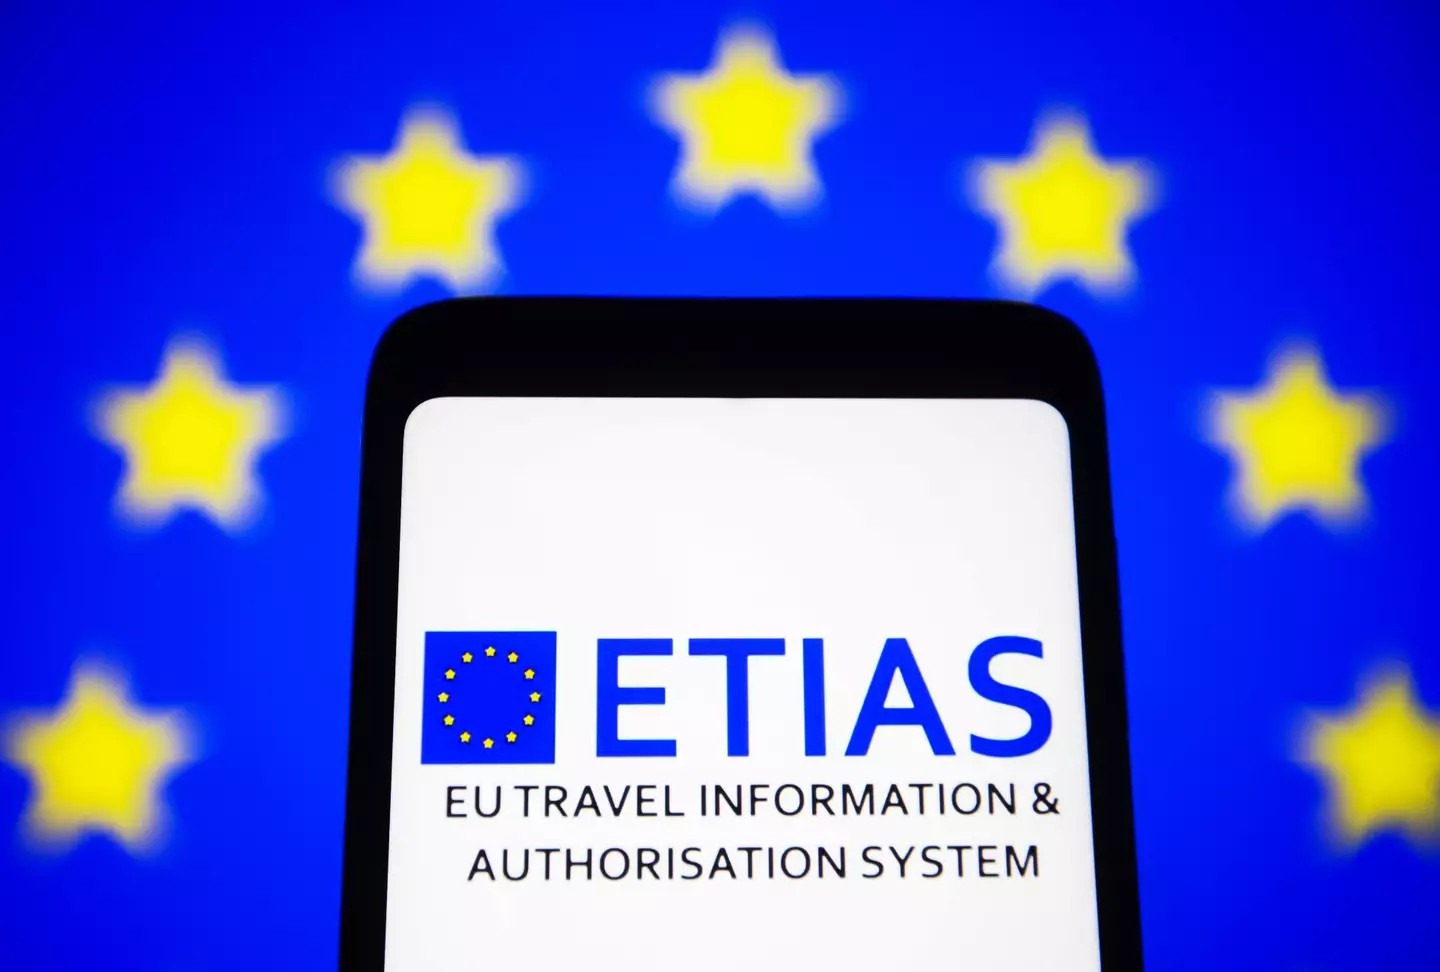 The ETIAS authorisation is due to come into place next year.